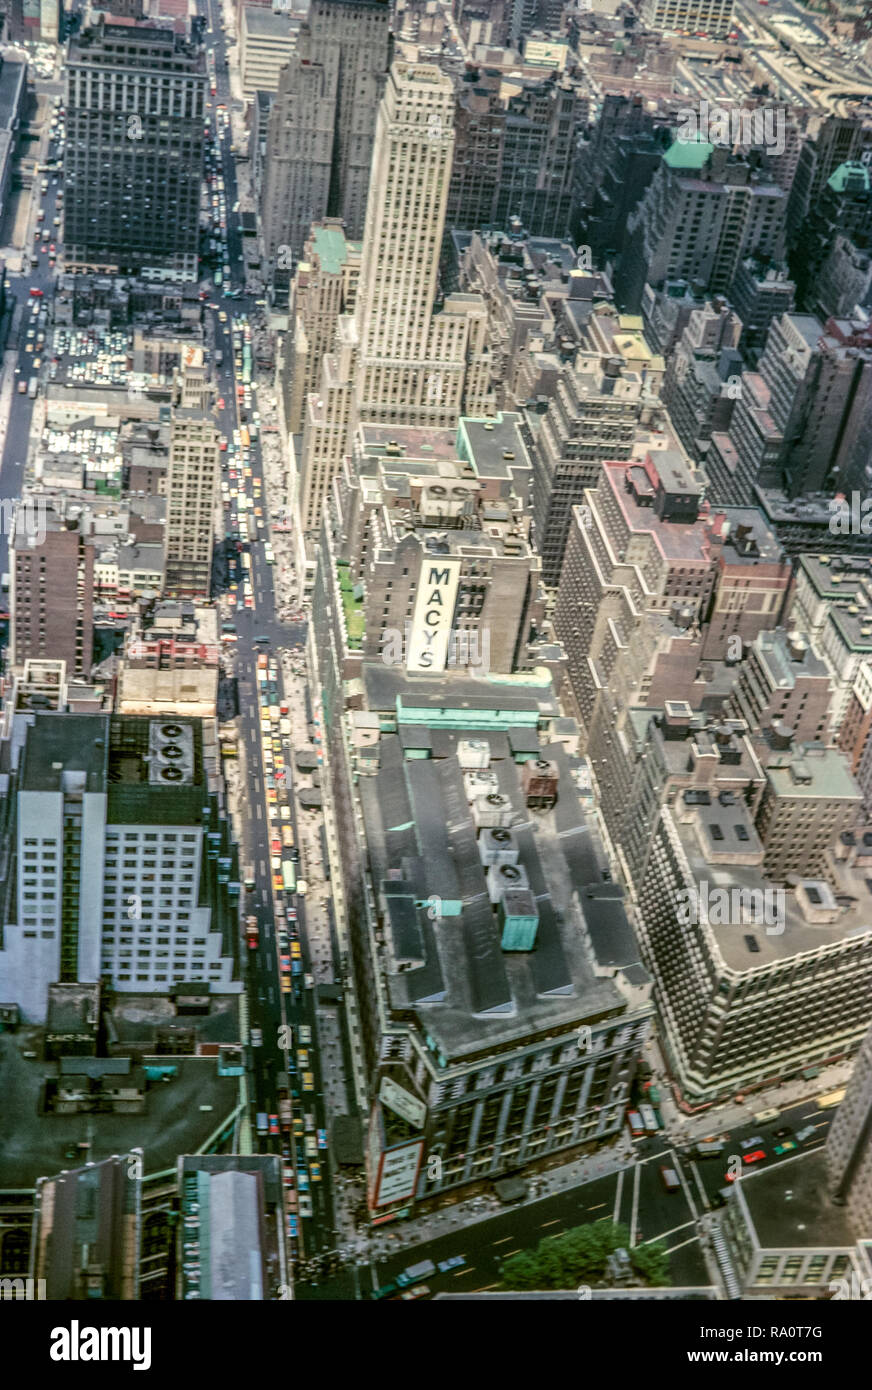 June 1964. View from the top of the Empire State Building looking up East  34th Street with Macy's Department Store in the middle foreground. Stock Photo